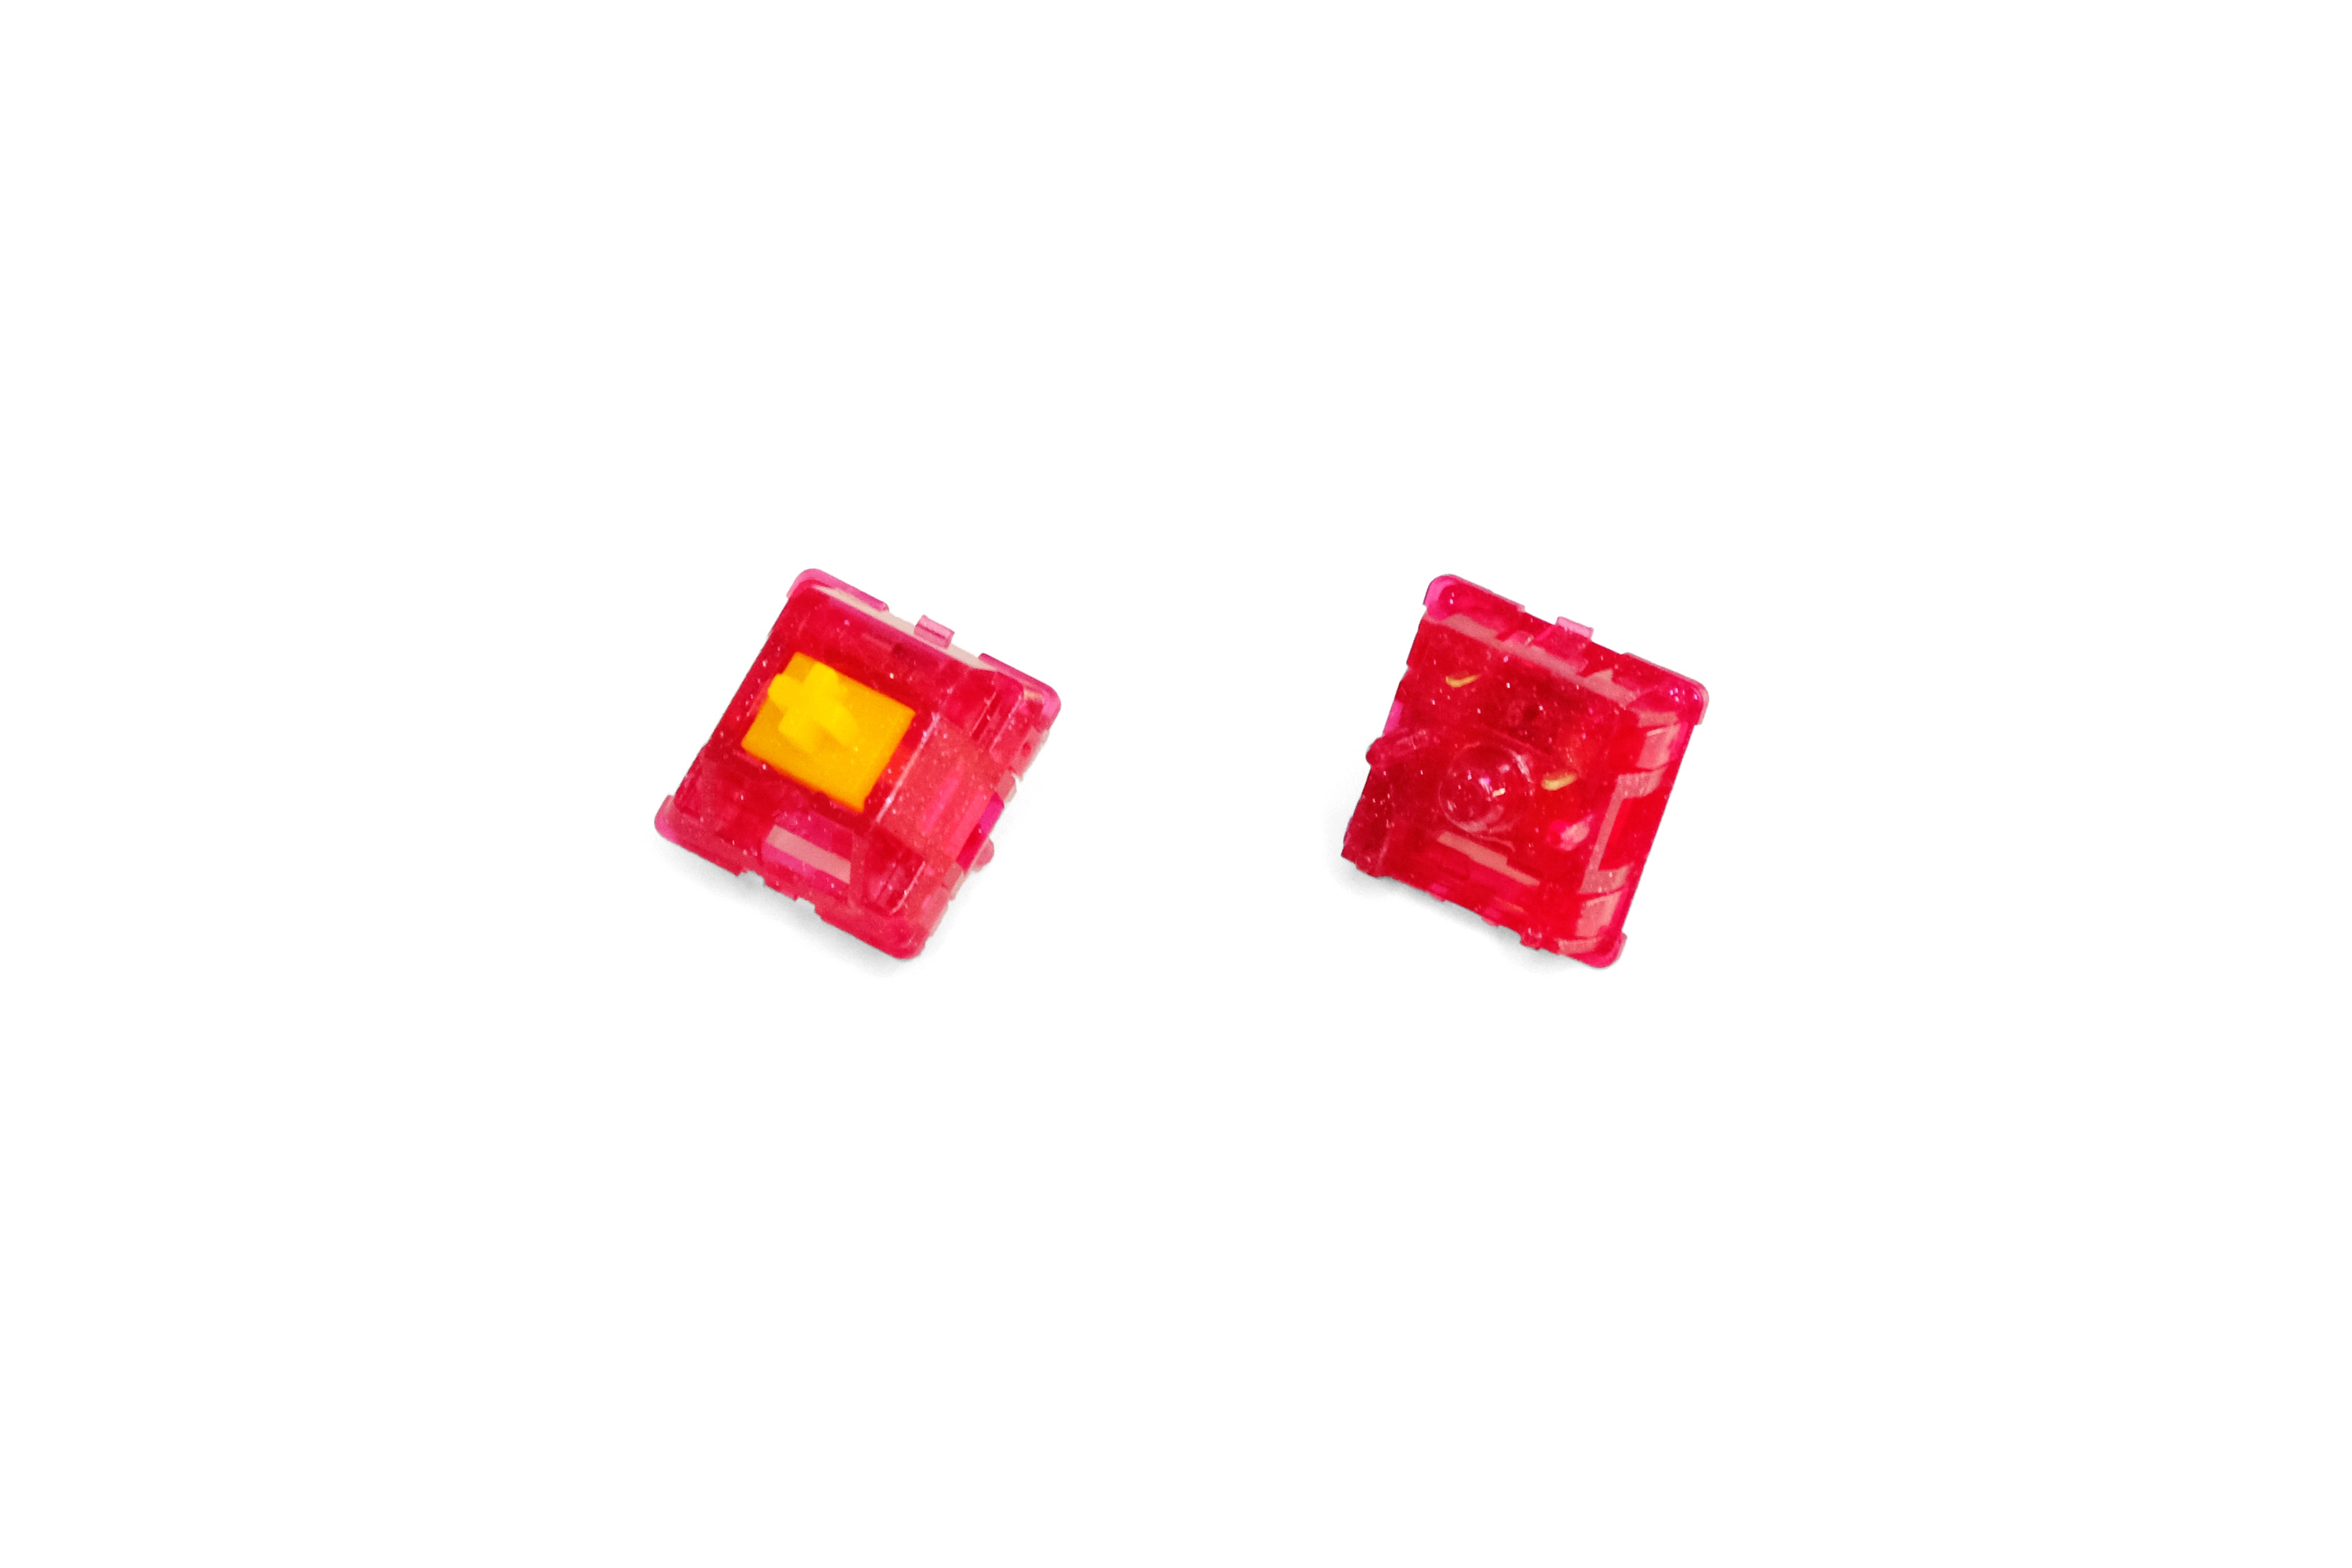 Tecsee Ruby V2 Linear Switches at KeebsForAll